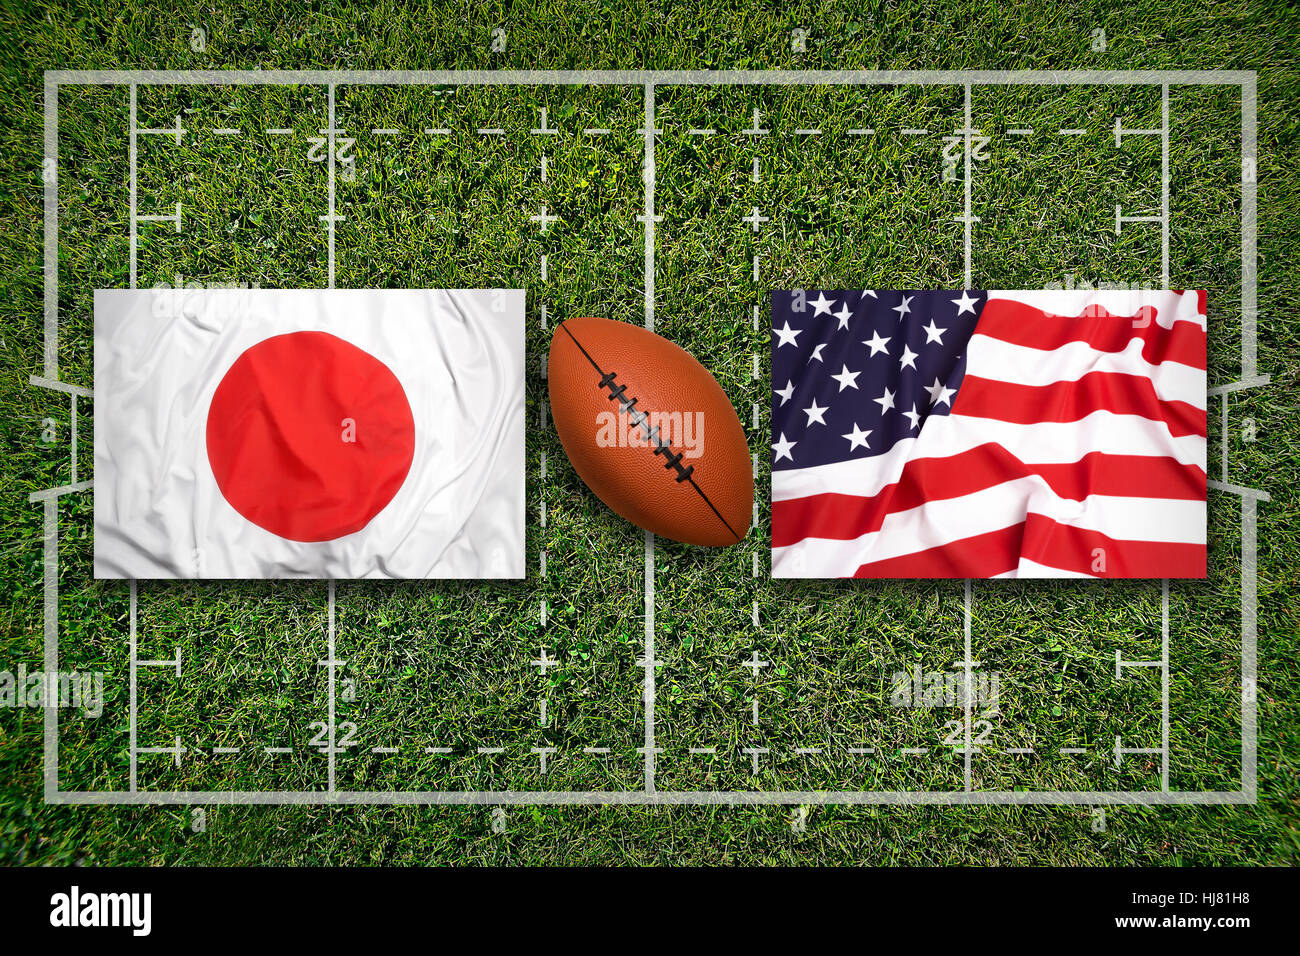 Japan vs. USA flags on green rugby field Stock Photo